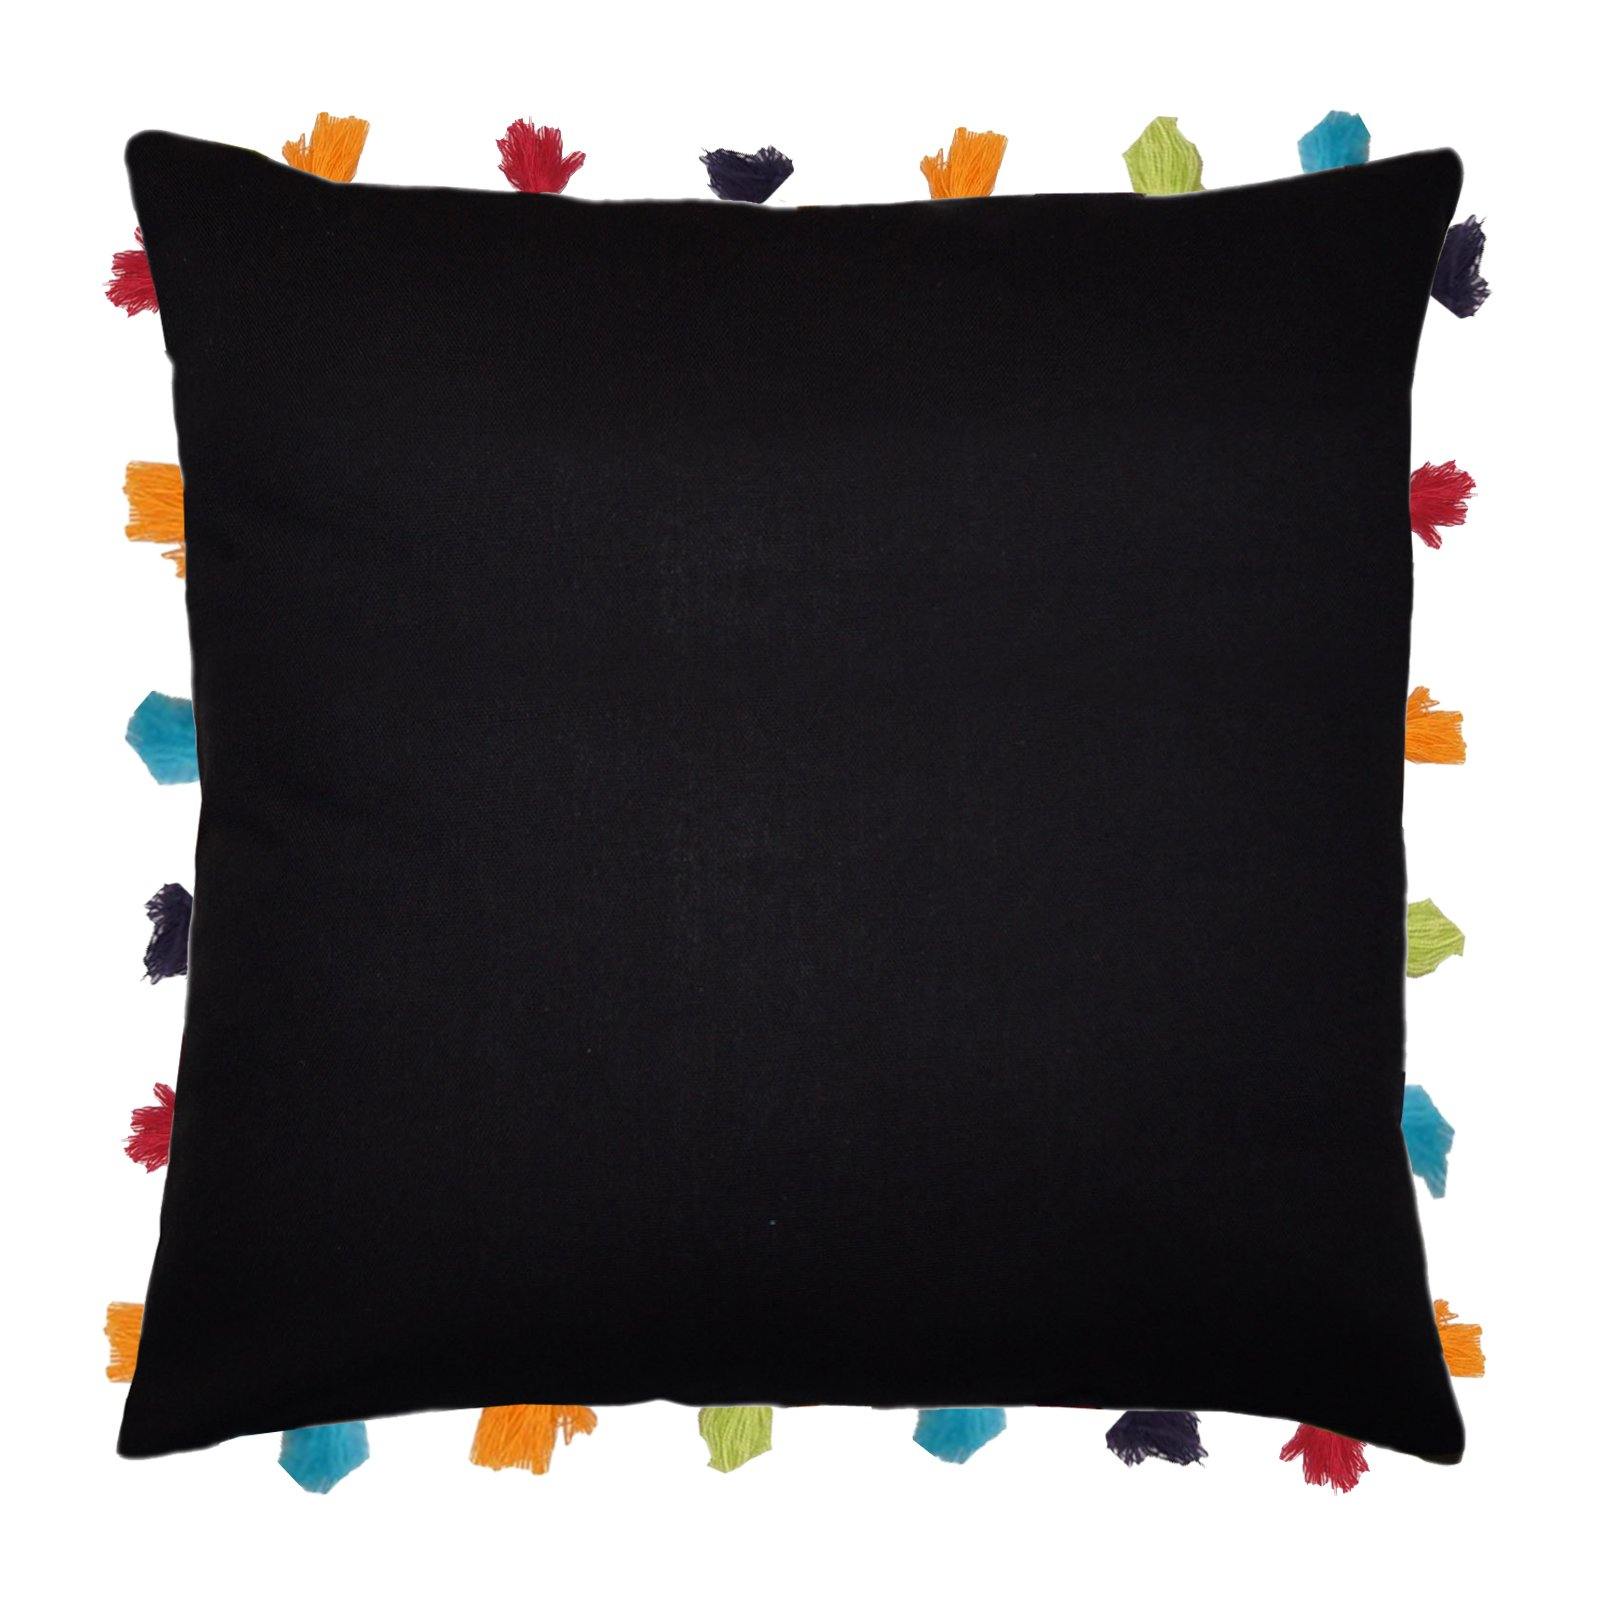 Lushomes Pirate Black Cushion Cover with Colorful tassels (Single pc, 18 x 18”) - Lushomes